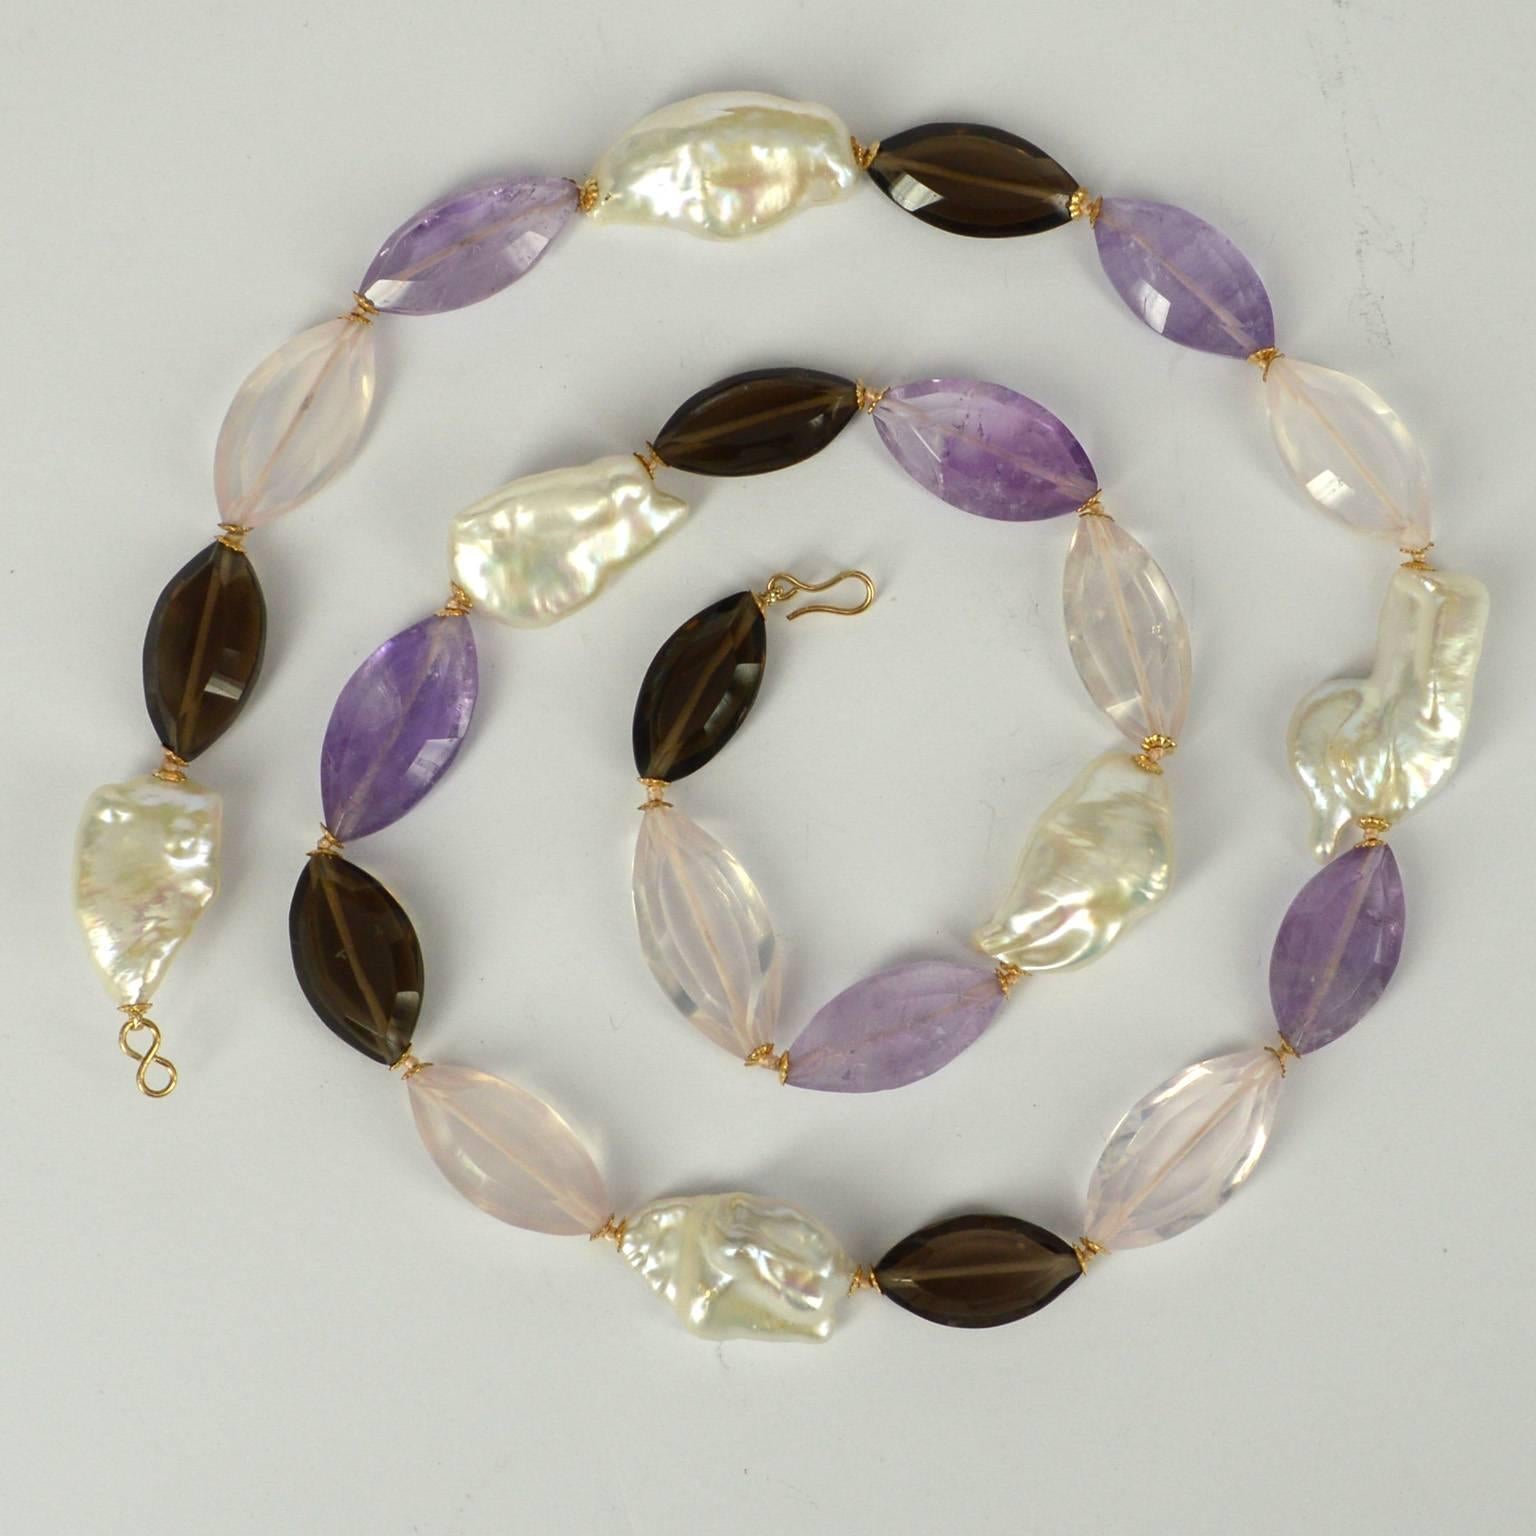 Long Keshi Fresh Water Pearls are matched with ellipse shaped Amethyst, Rose Quartz and Smokey Quartz beads, spaced with 14k Gold filled caps and hand knotted on pink thread. Stones range from 24-30mm and the Pearls from 26-31mm. Necklace is